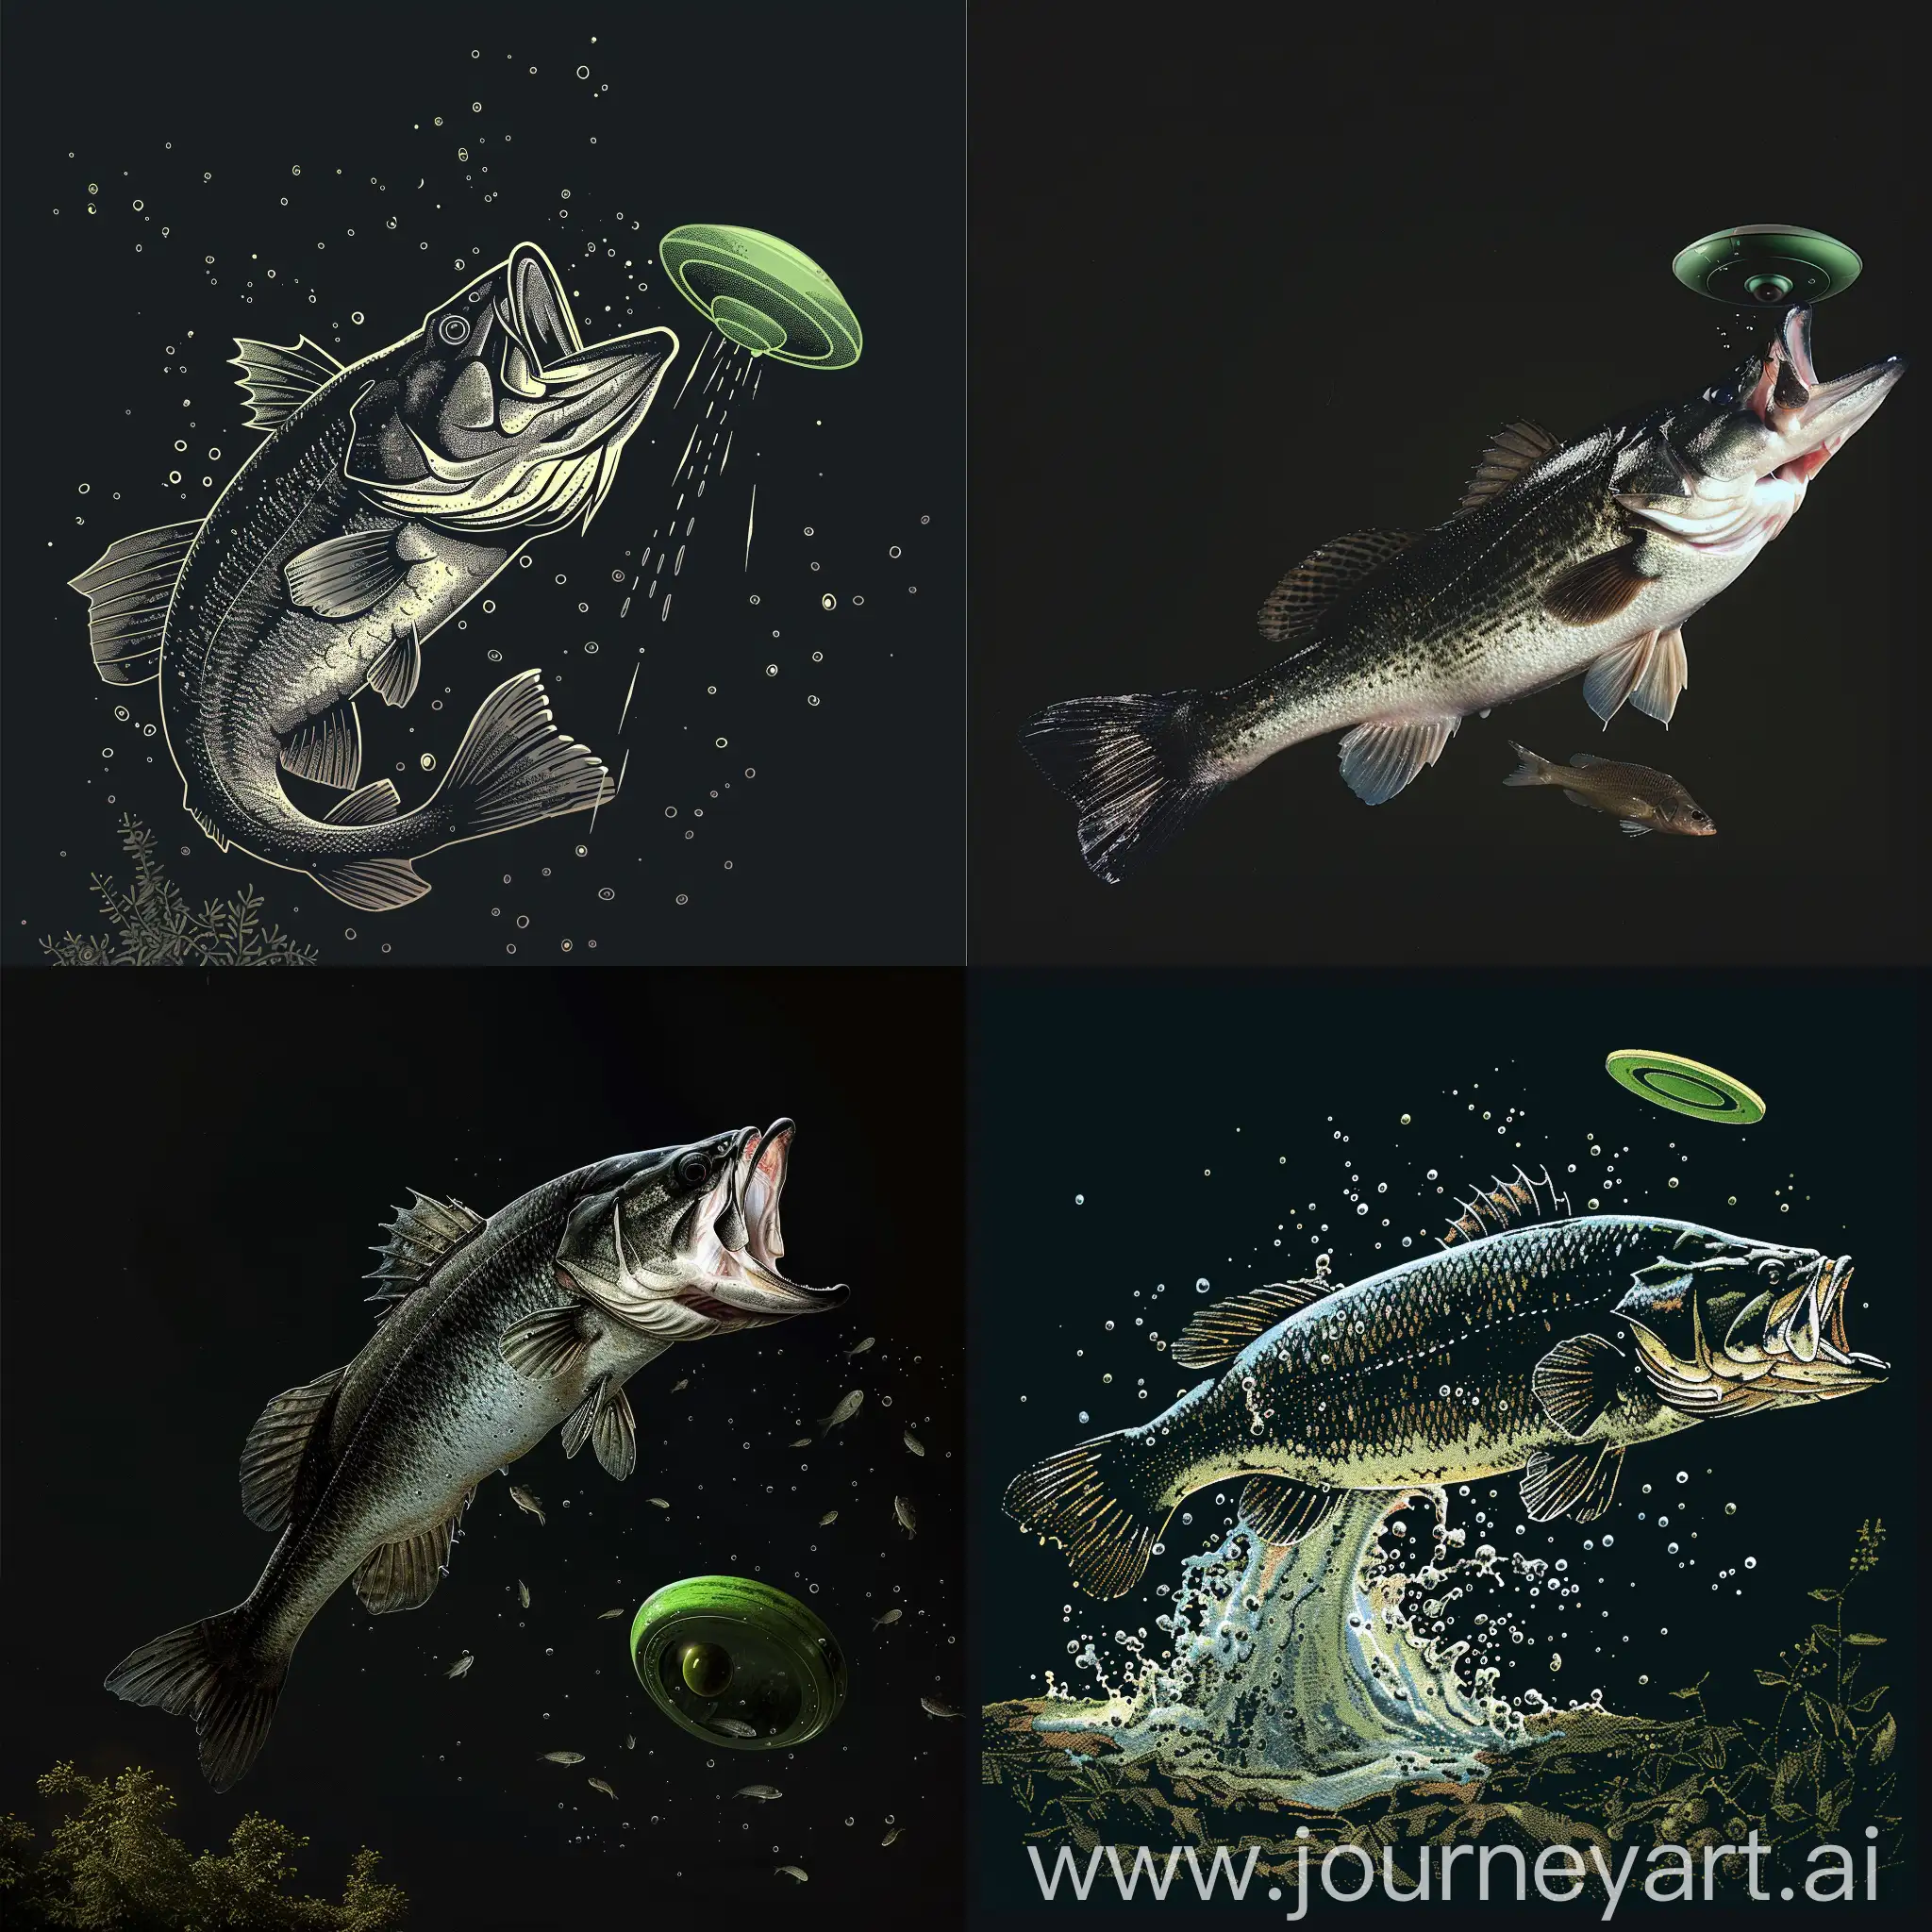 Image of Black Bass, jumping and catching a green UFO with his mouth, the background of the image is black